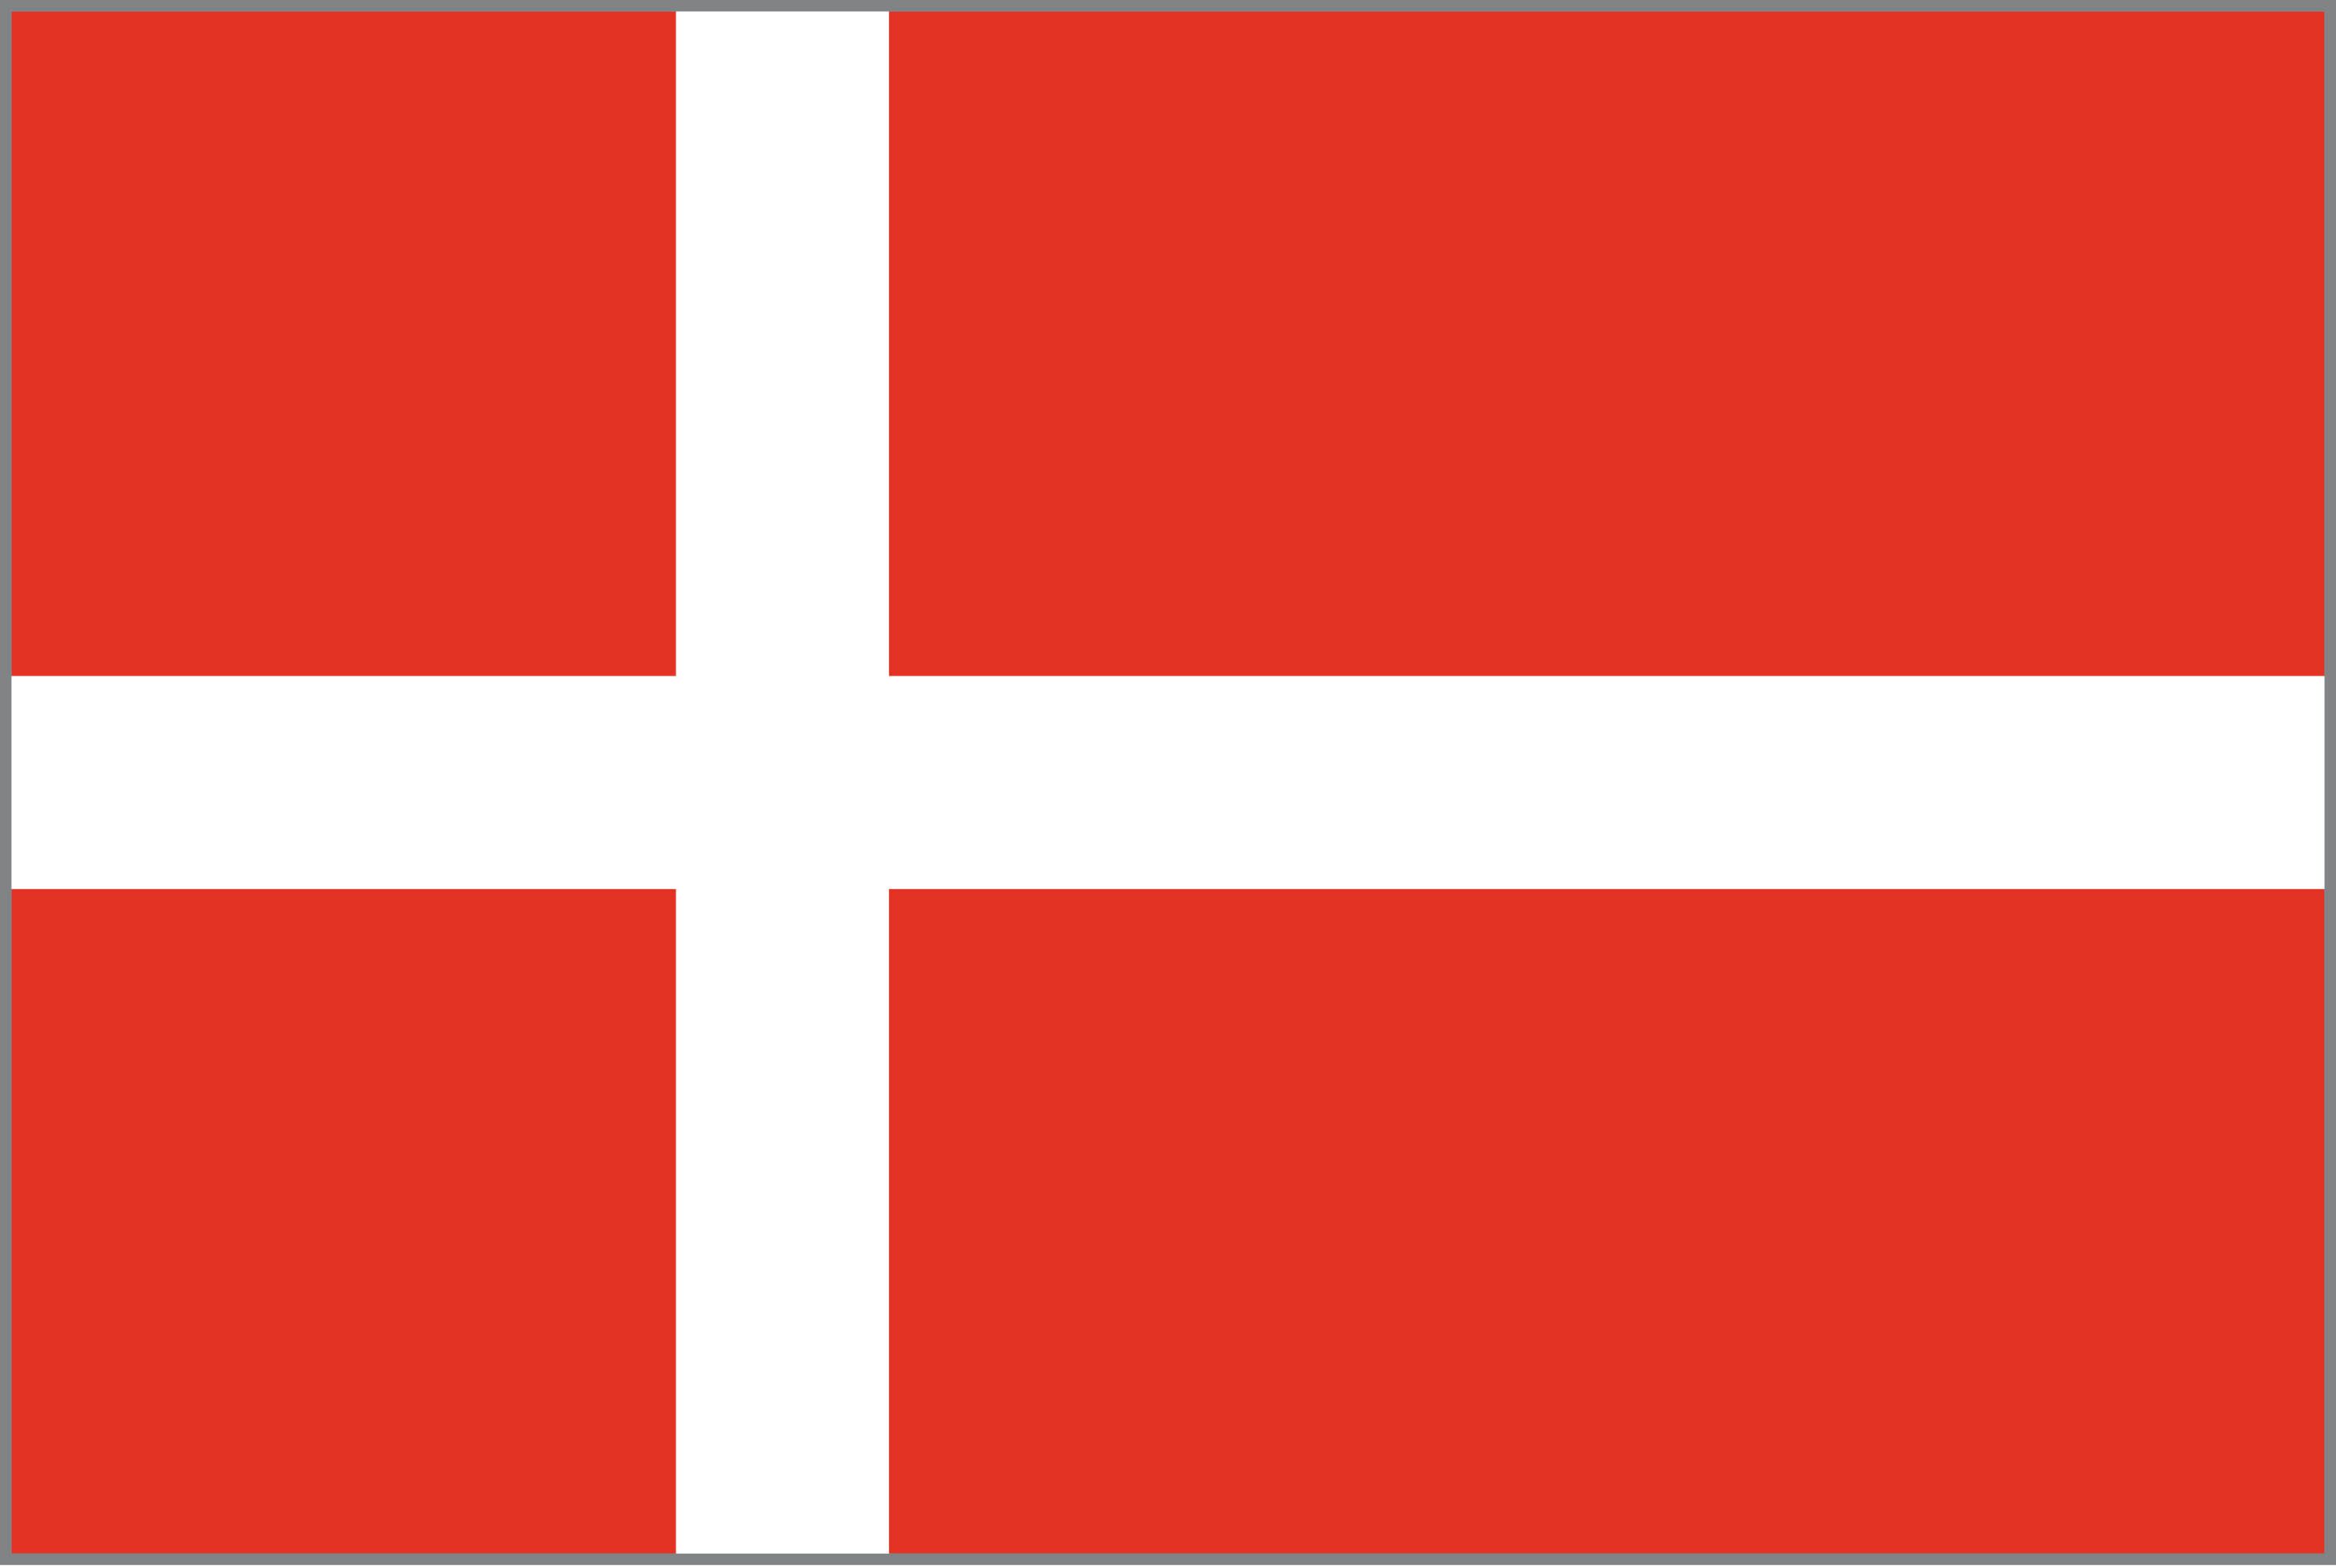 The flag of Denmark. (Getty Images)